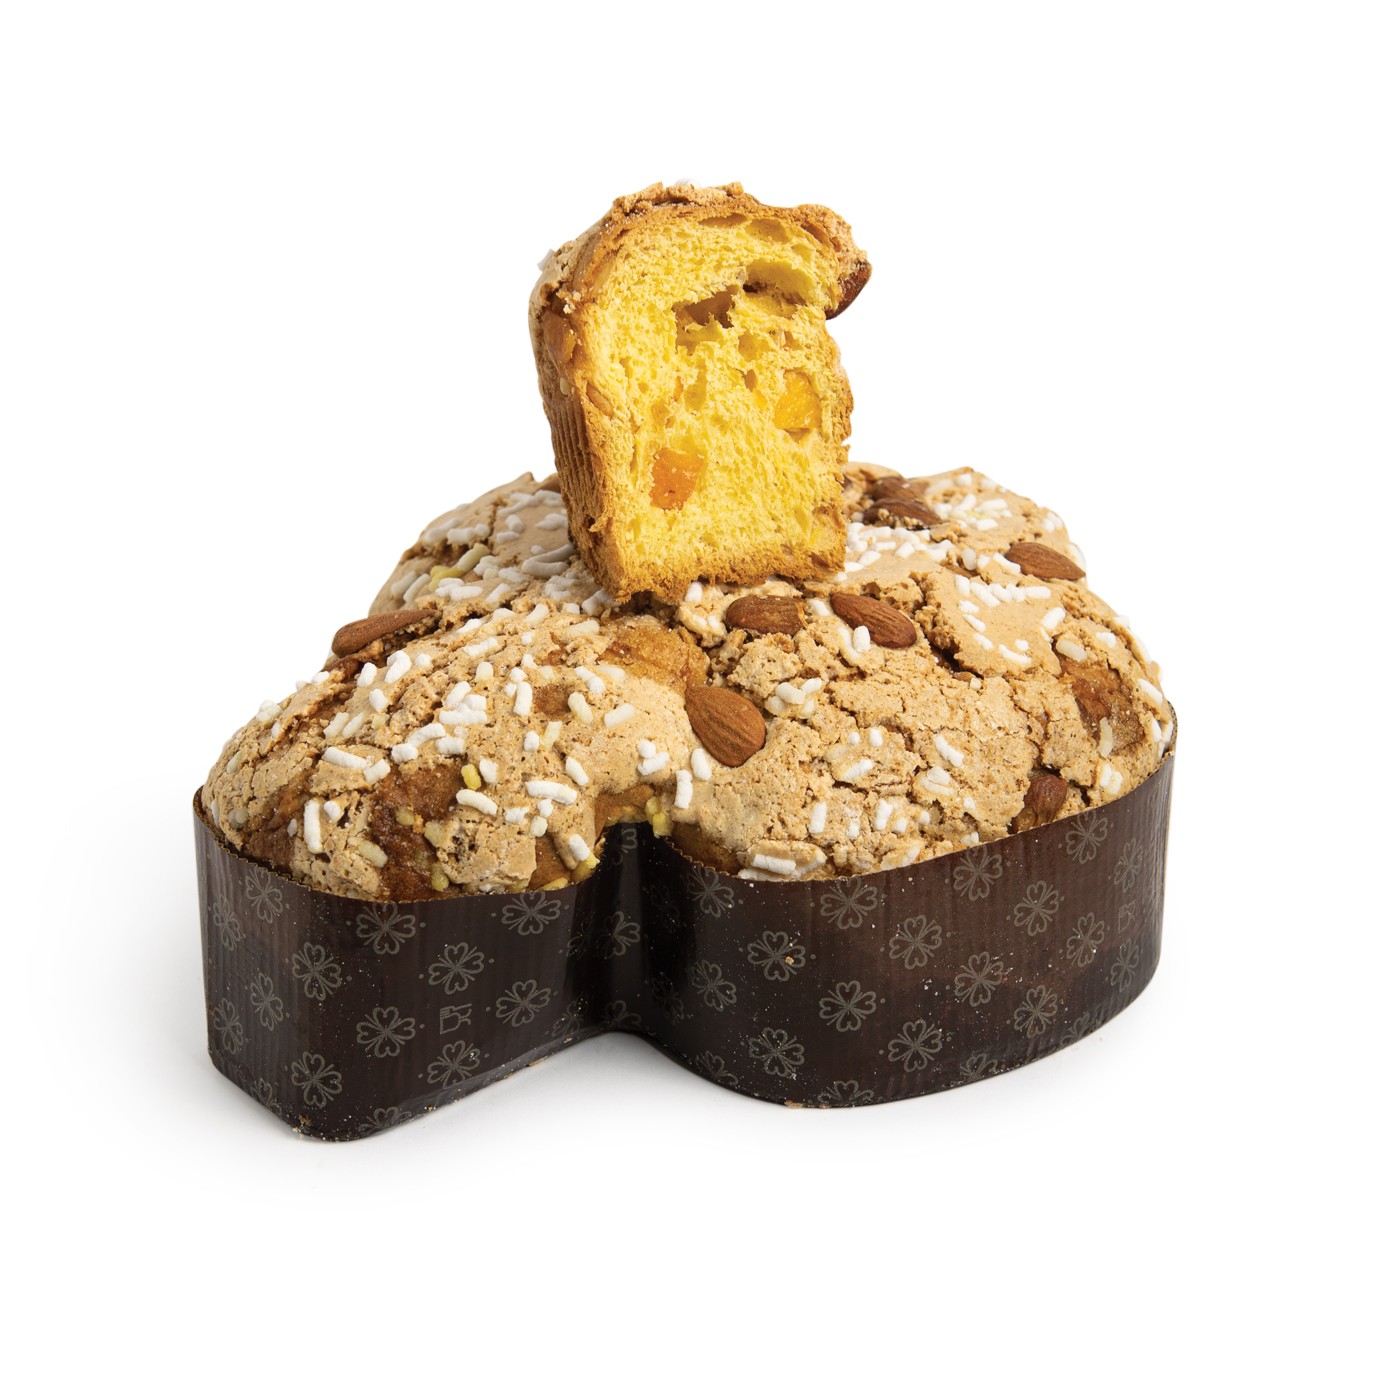 Gran Galup Classic Colomba 26.4 oz - Galup | Eataly.com